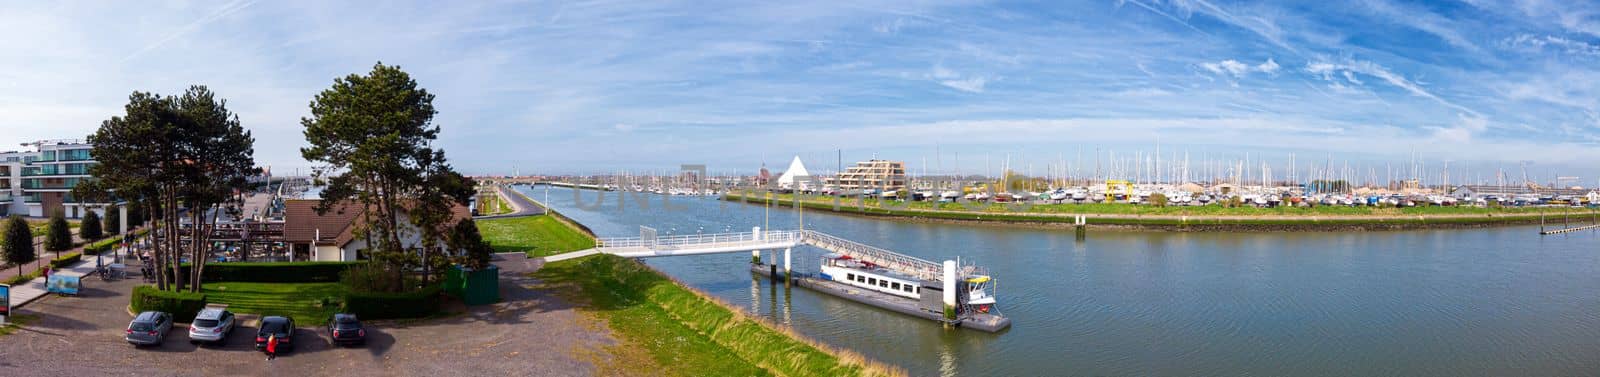 view on the marina of Nieuwpoort by Youri